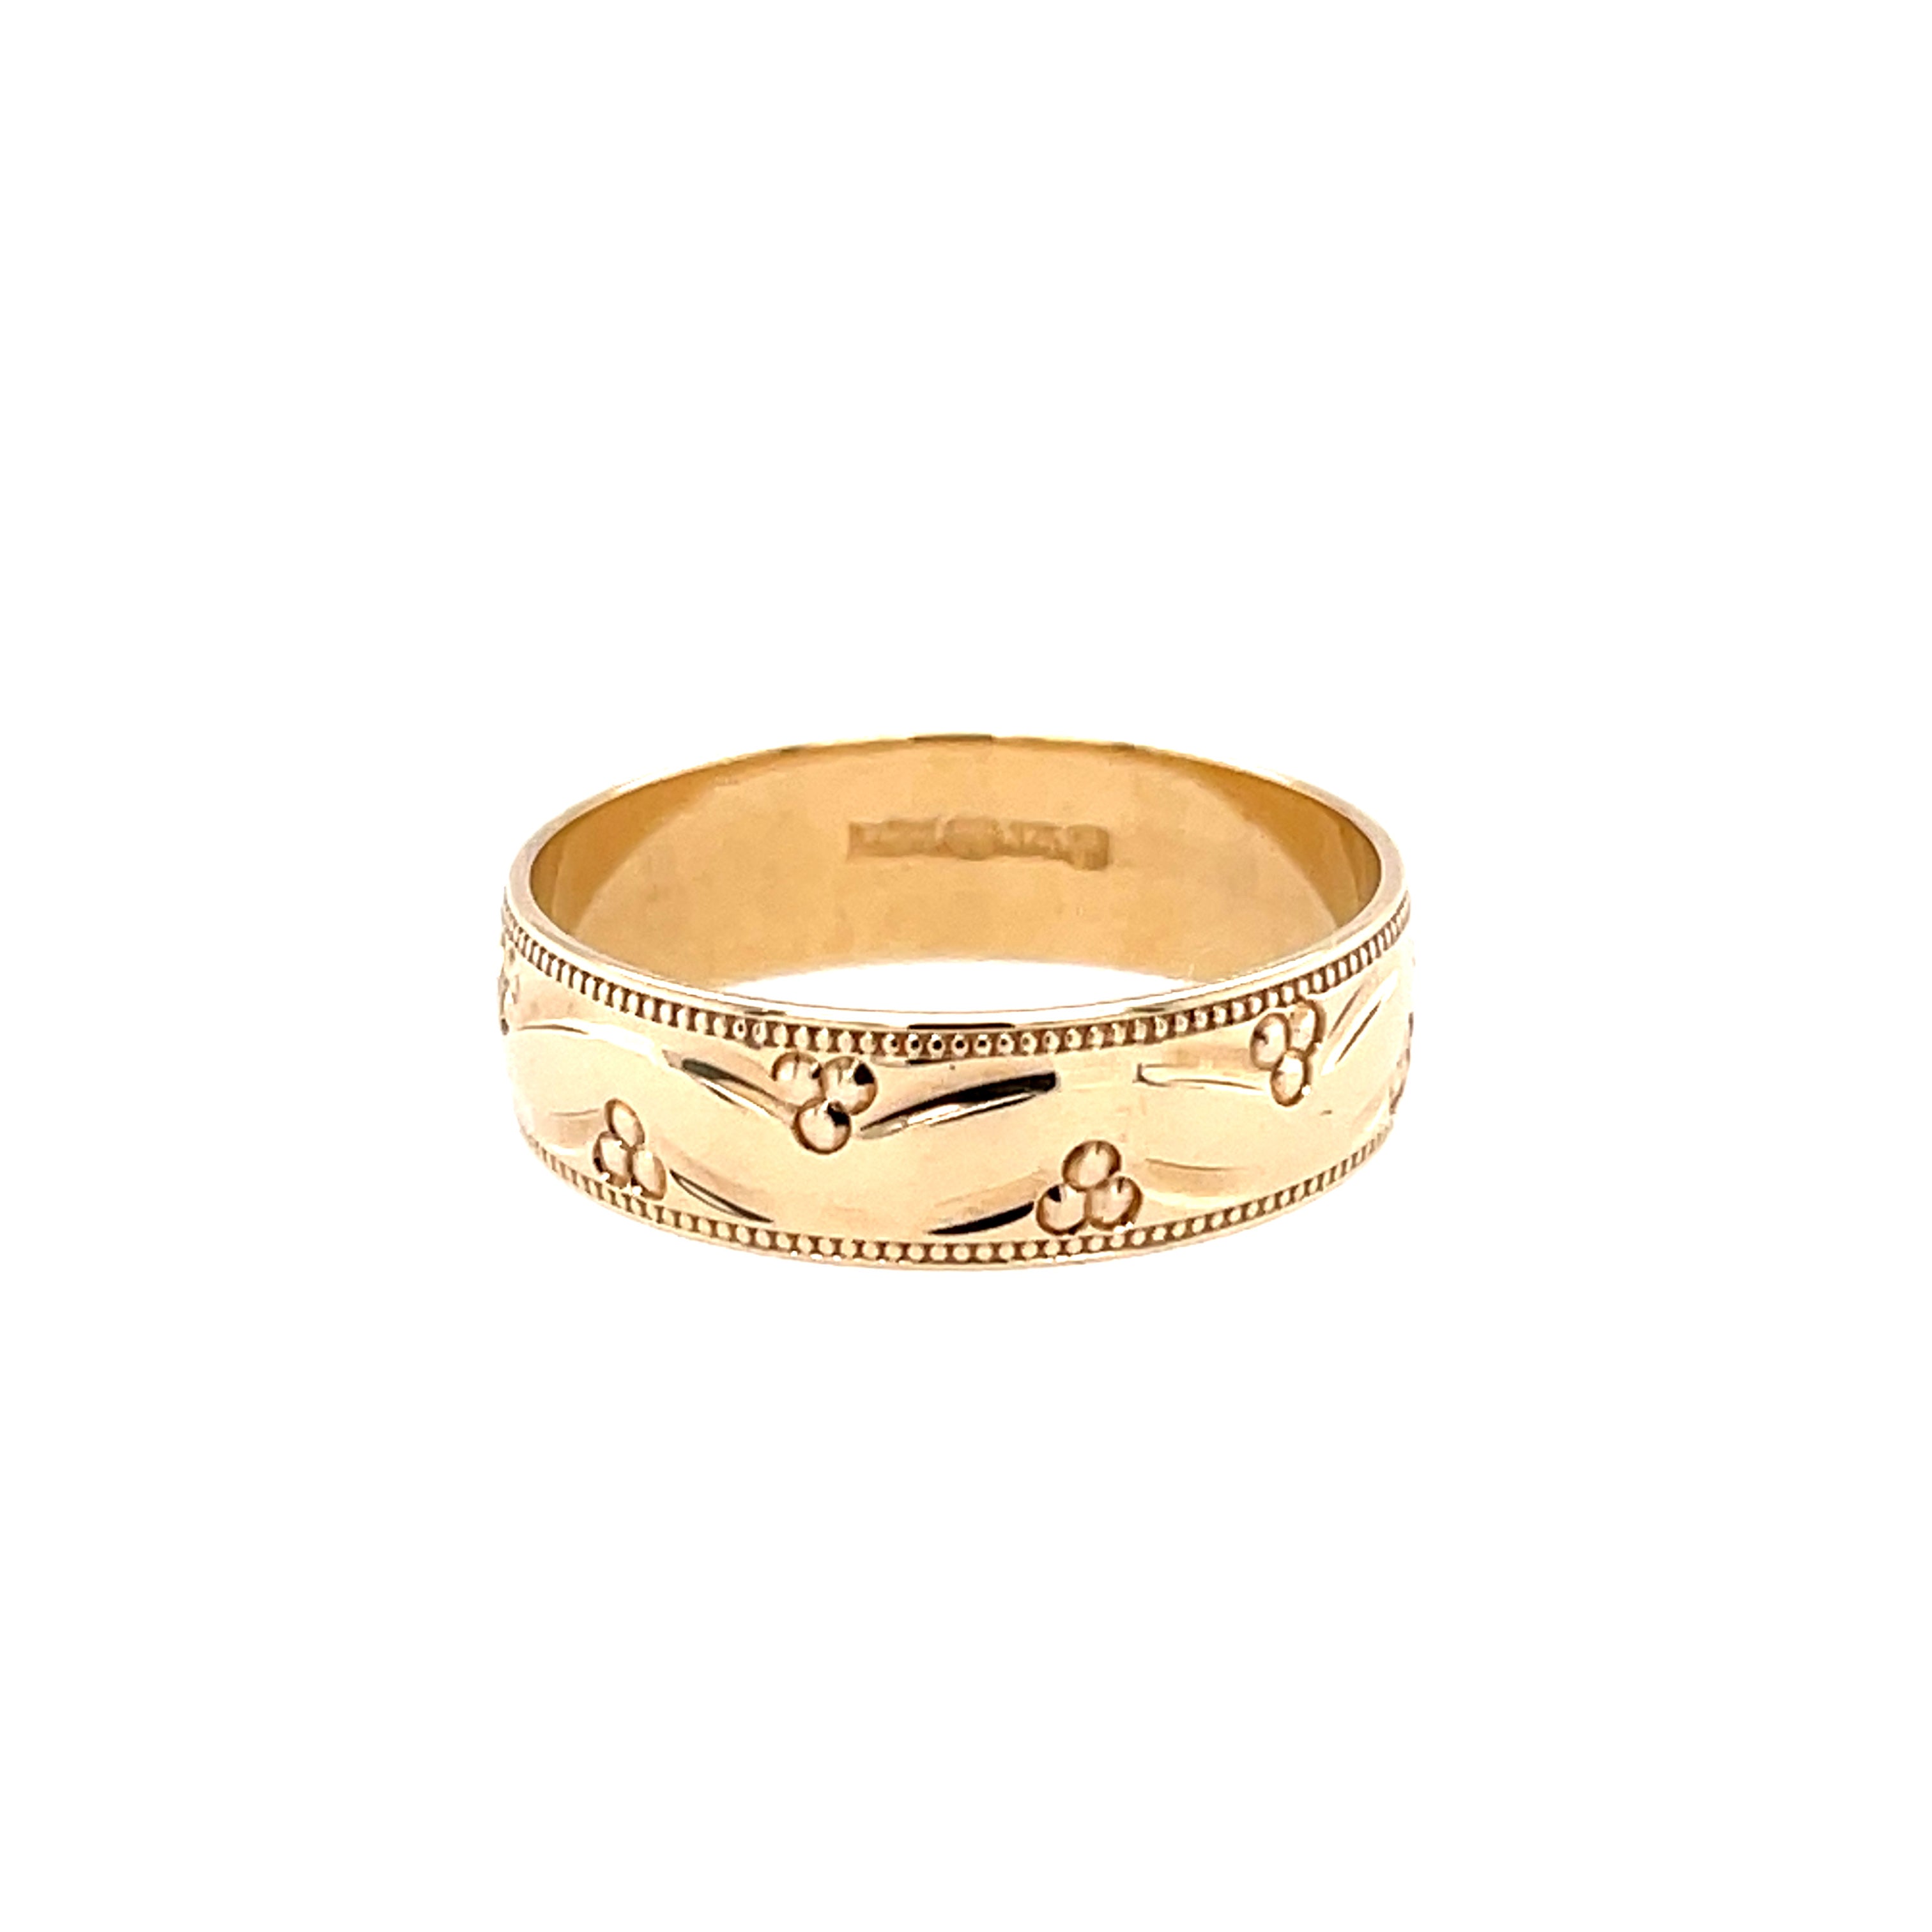 9ct Yellow Gold 5mm Patterned Wedding Band Ring - Size L SOLD